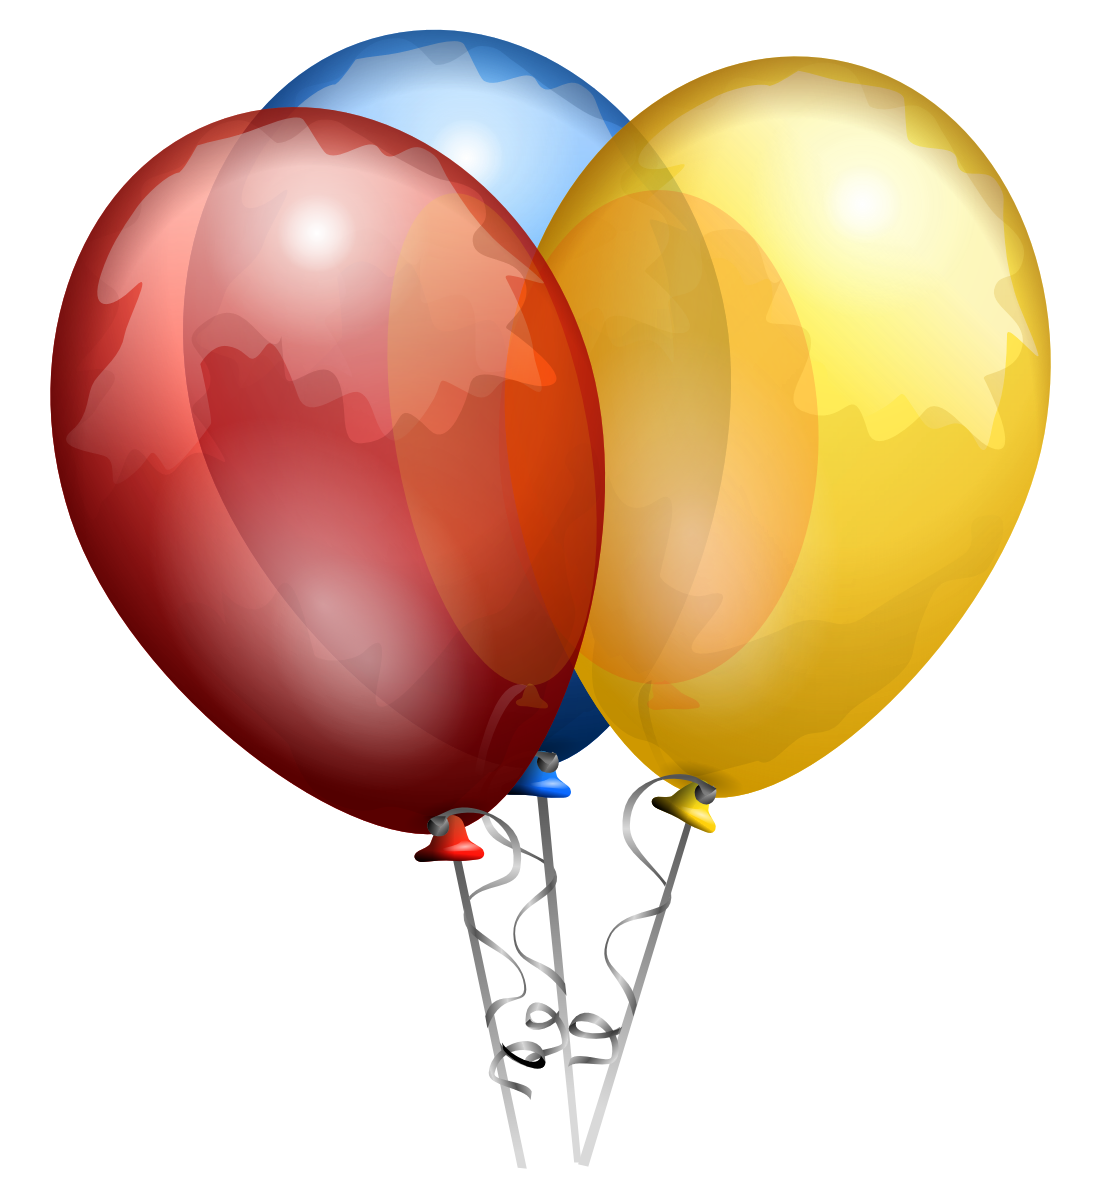 Balloon clipart free download clip art on